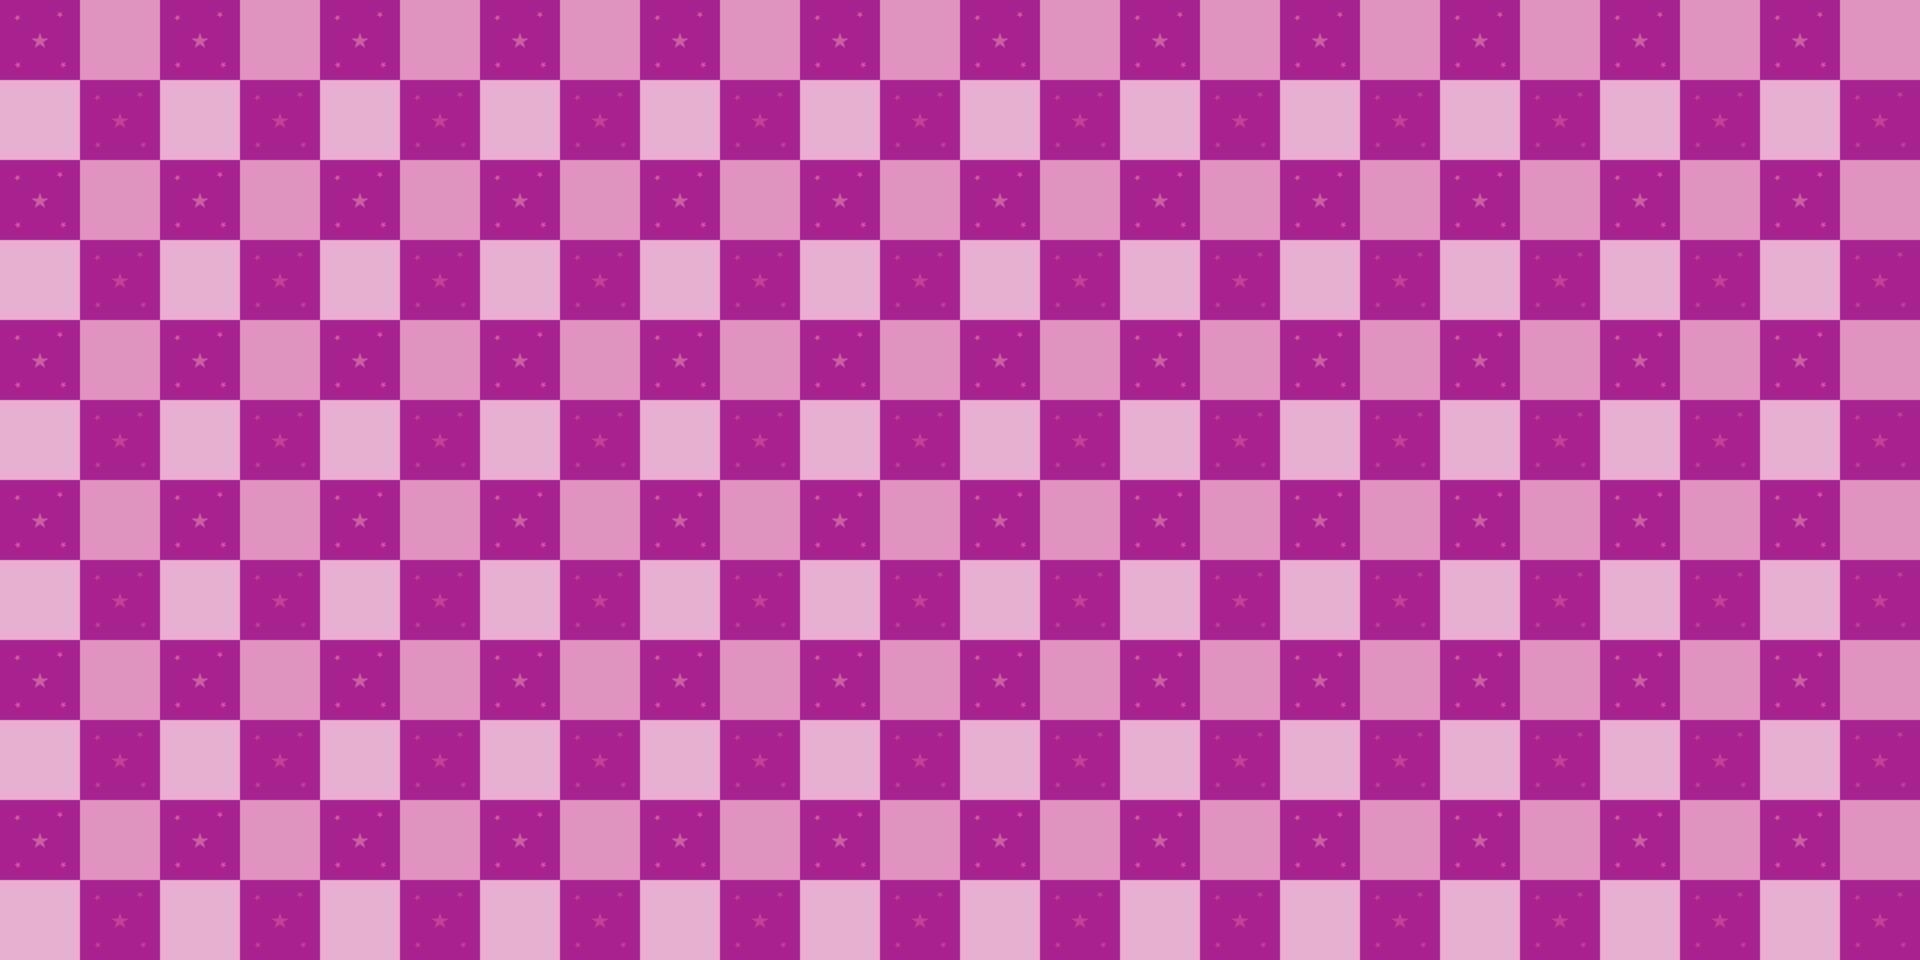 Plaid fabric textile cloth tablecloth star purple pink abstract background texture wallpaper pattern seamless vector illustration 08192021